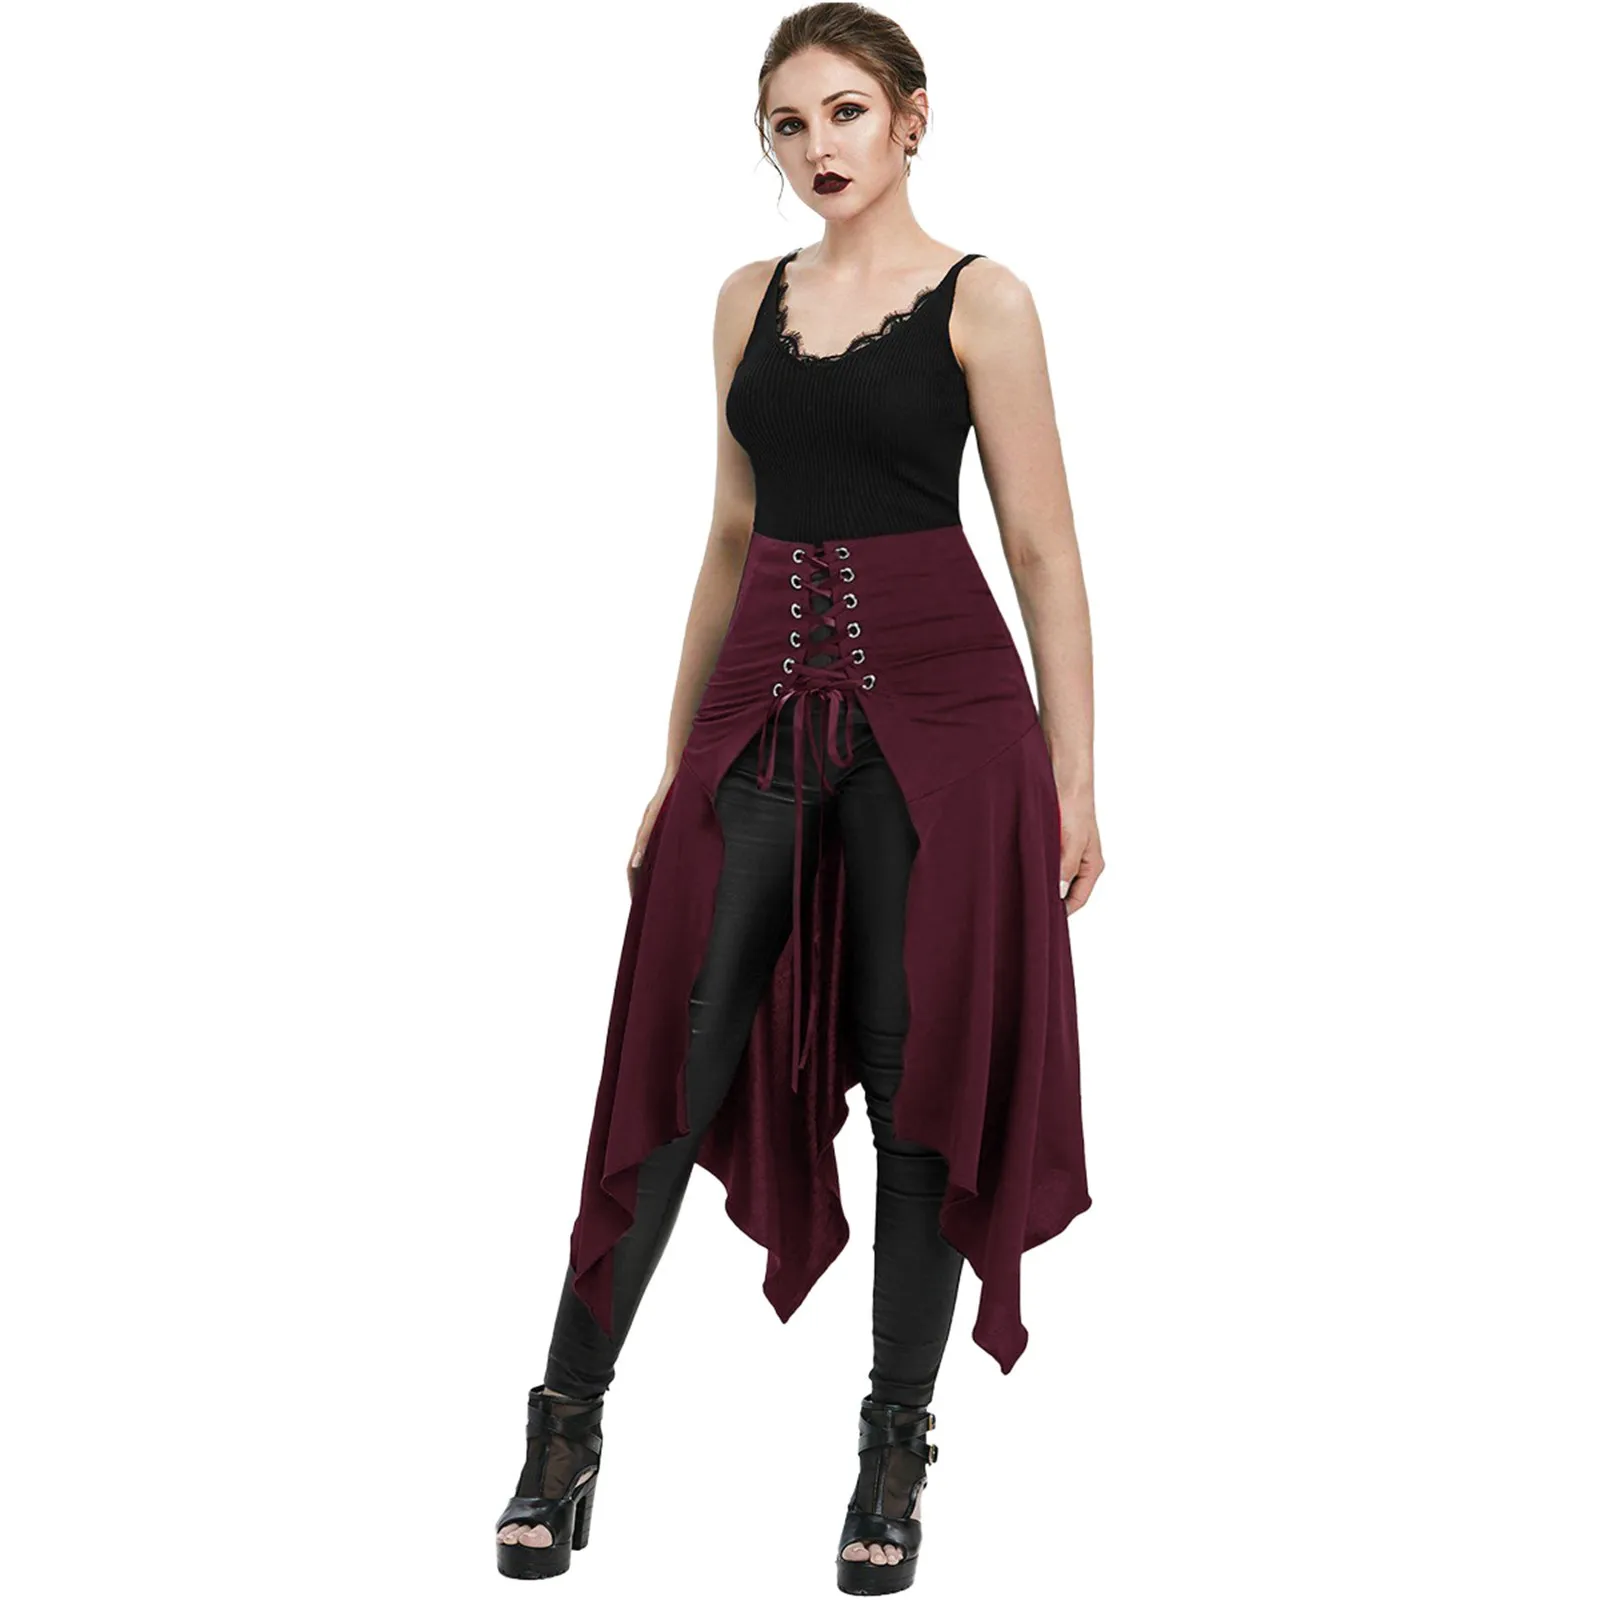 

Women's Fashion Solid Color Punk Gothic Style Asymmetric Front Lace Up Slit A Line Skirt Fashion Buttons Crossed Frenulum Skirts